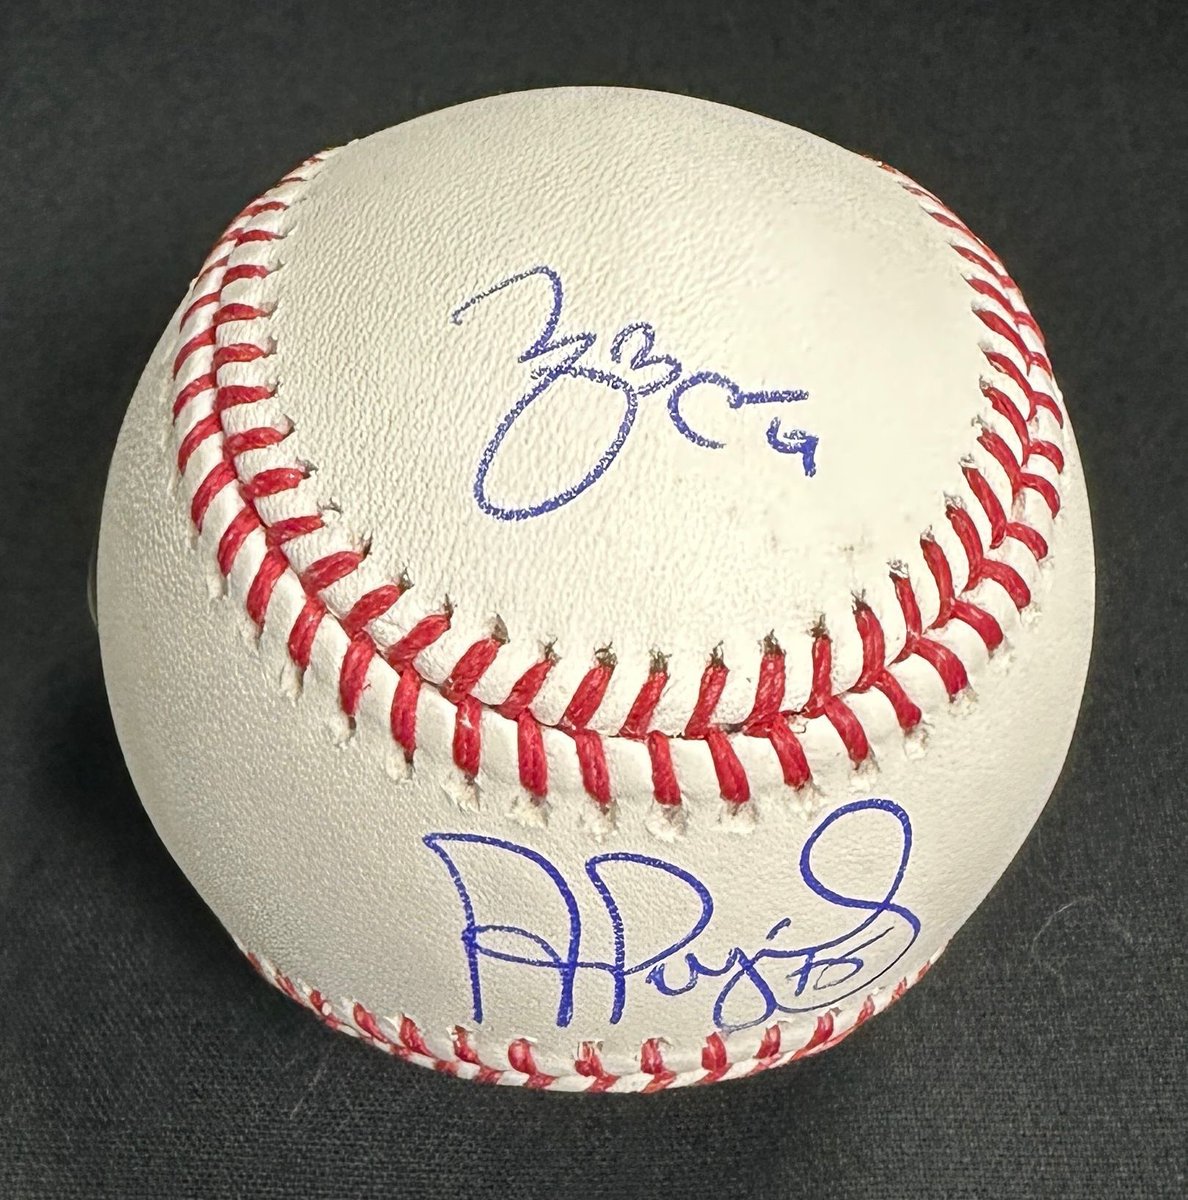 Support the @pujolsfound by purchasing a ticket for their July raffle! This authentic baseball was signed by Molina, @UncleCharlie50, and me! 100% of this raffle's proceeds support the PFF. The raffle ends tonight at 6 pm CST. Buy your tickets here: goraisedough.com/buy/1700